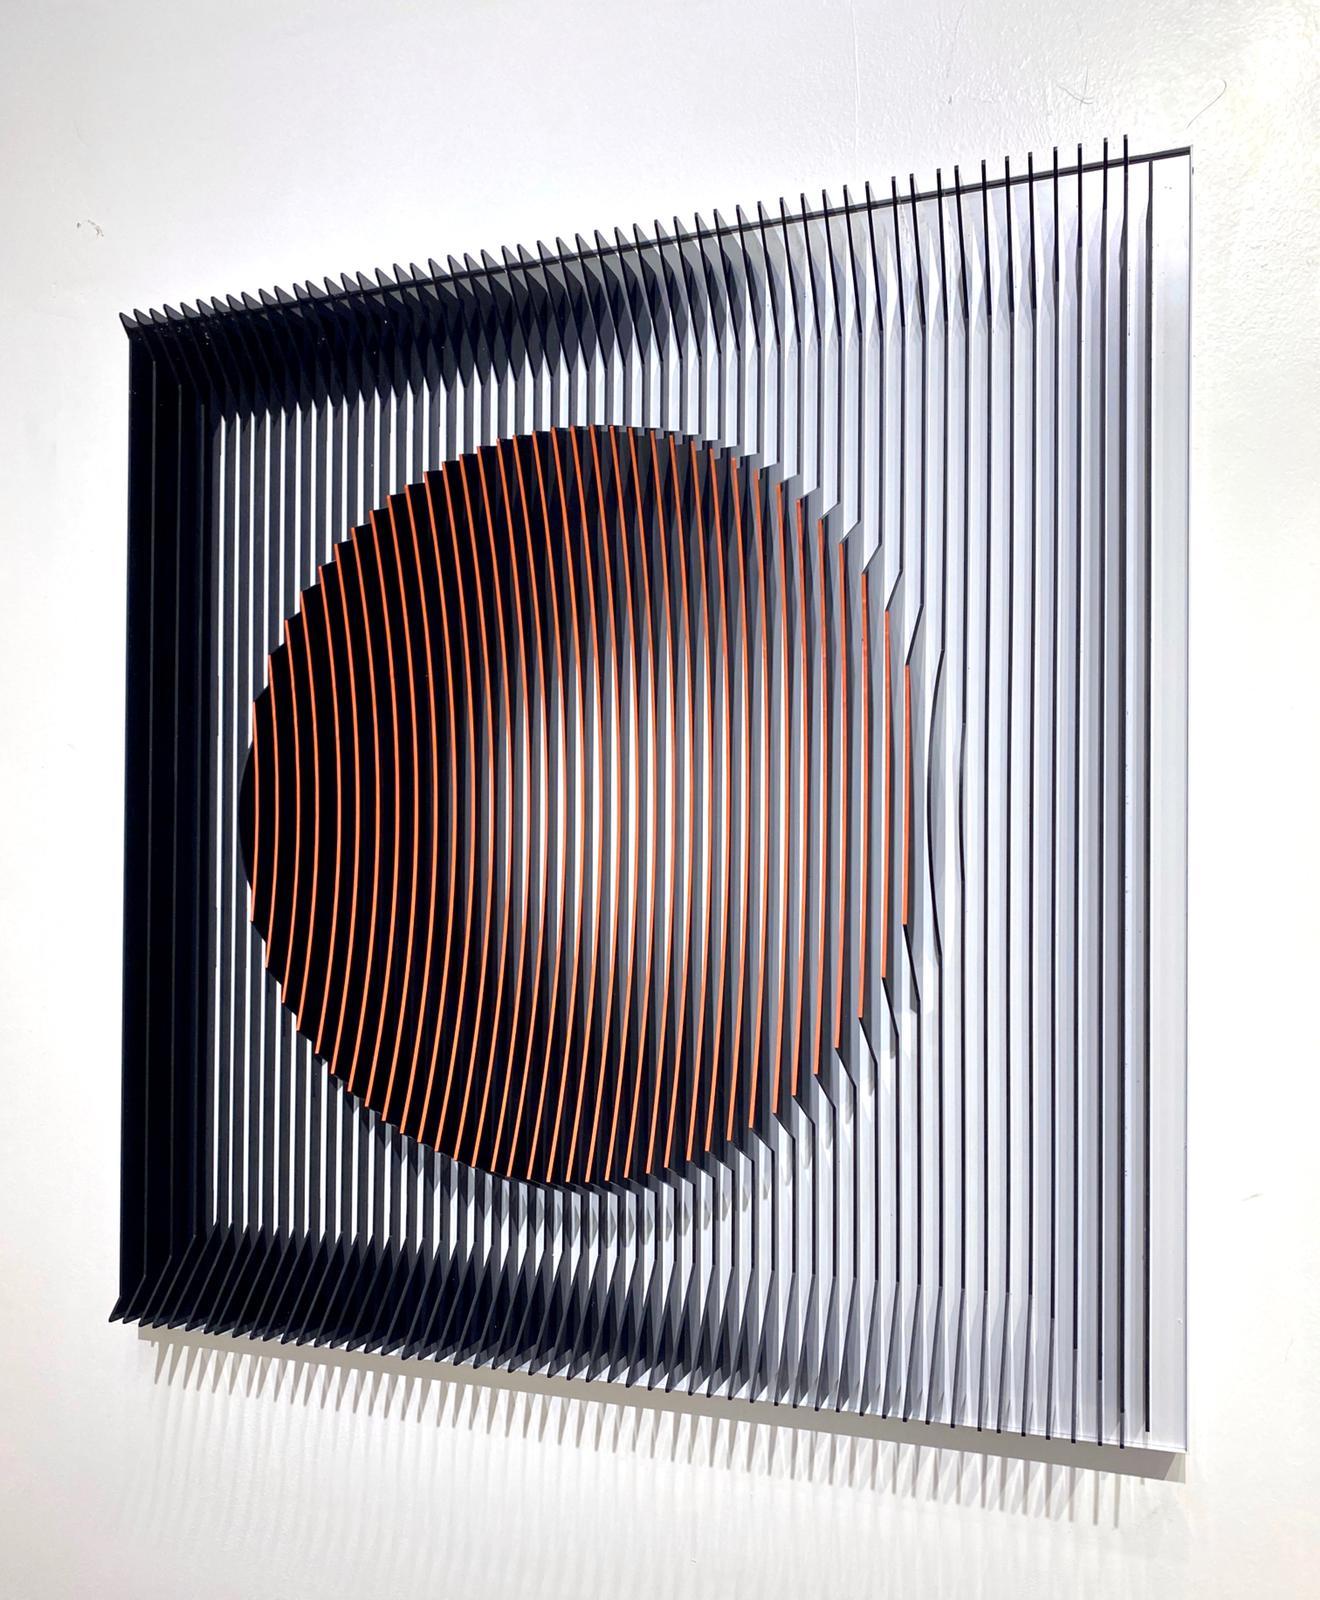 J. Margulis - Orange moon - kinetic wall sculpture  - Contemporary Mixed Media Art by Jose Margulis